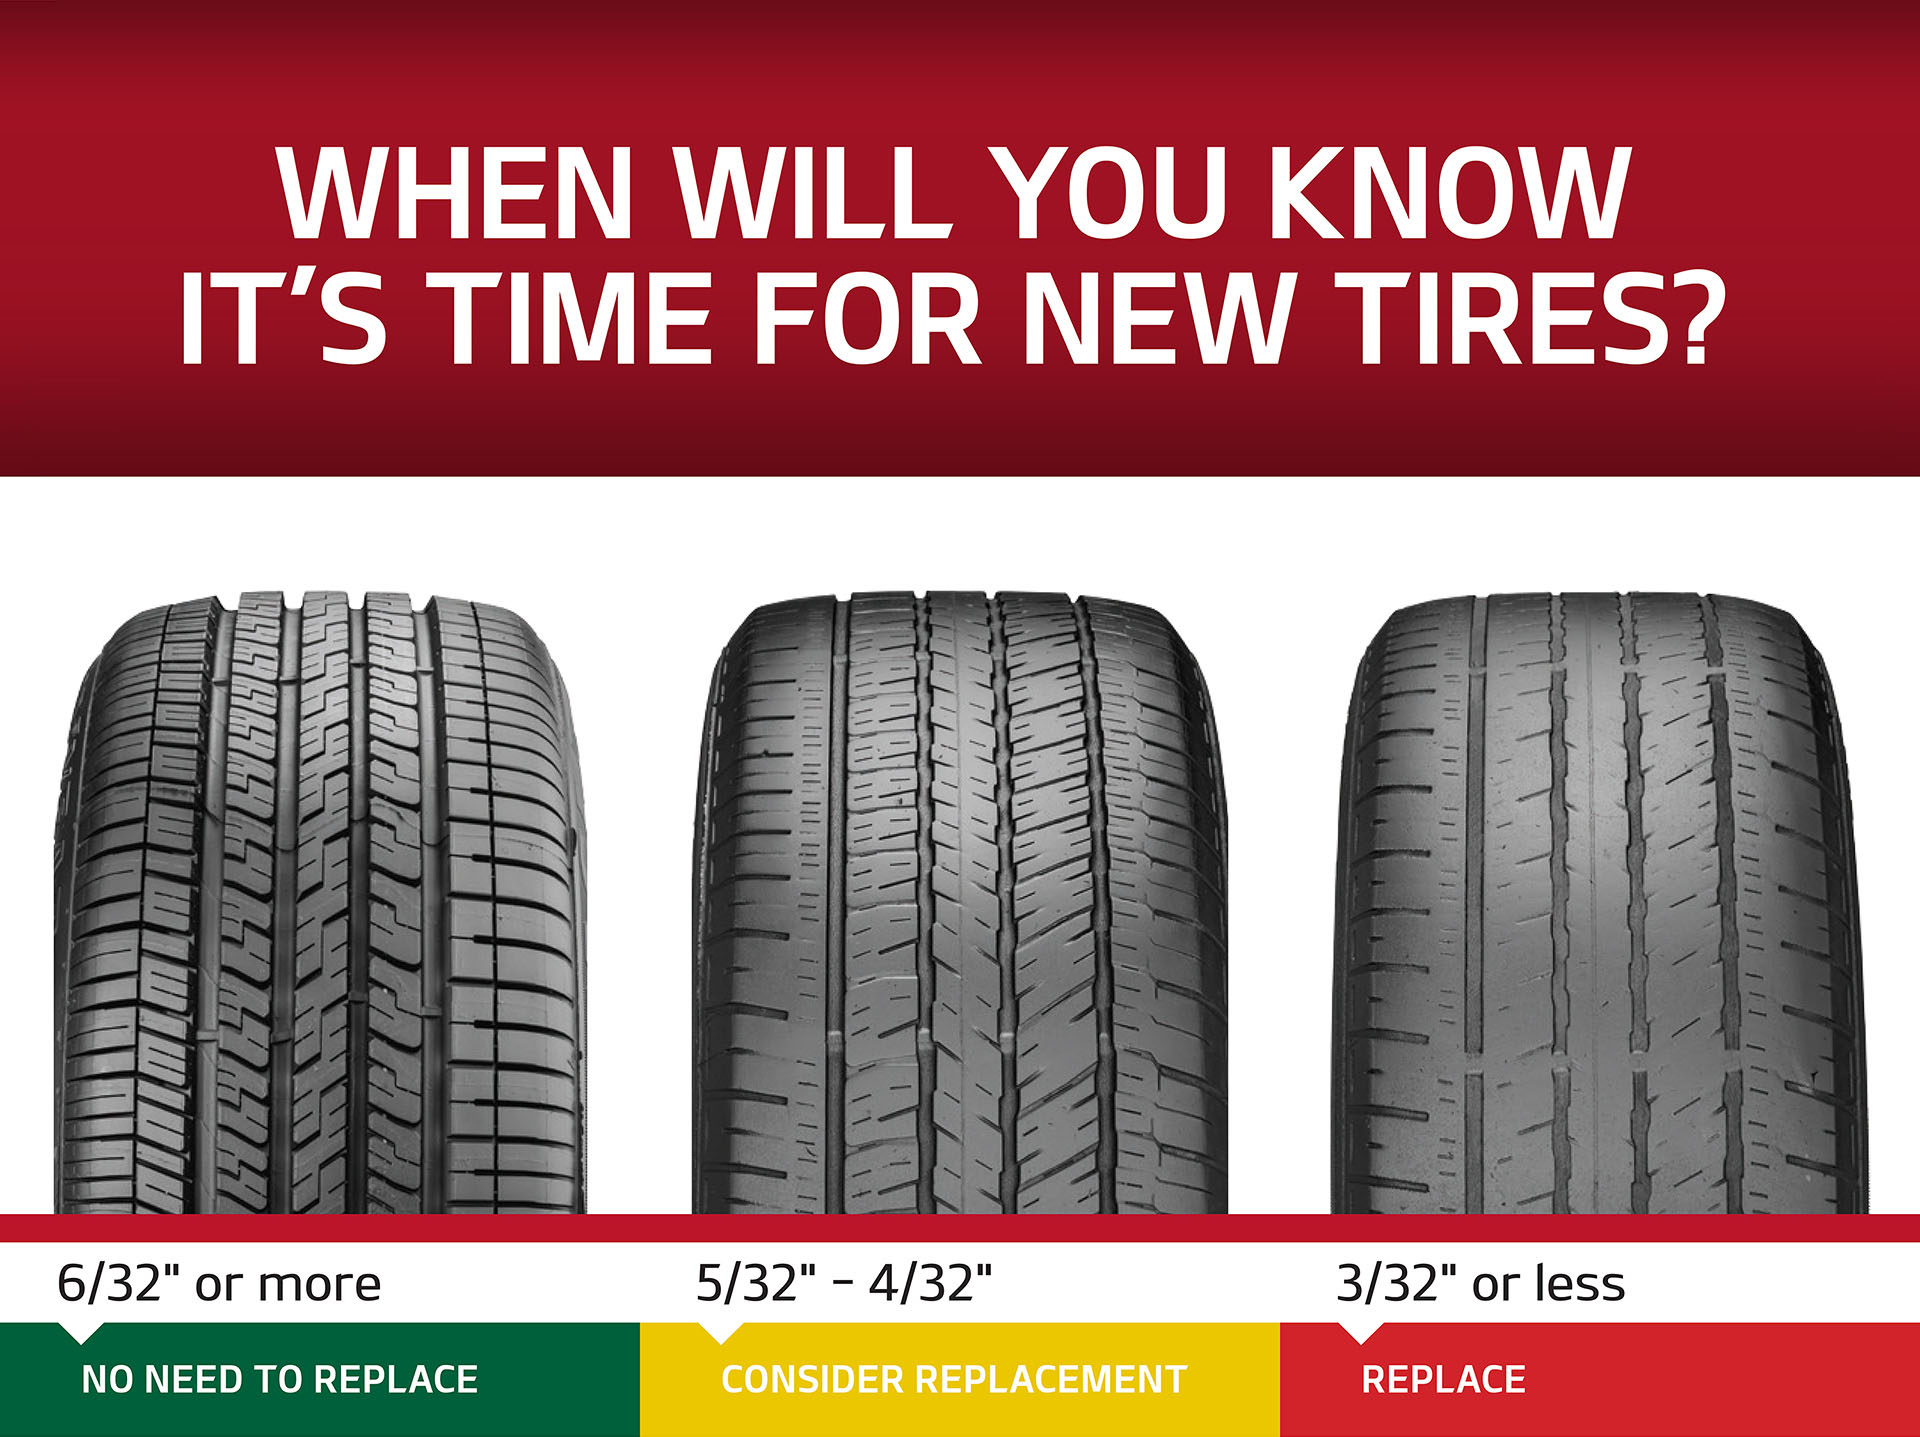 When to replace your tires